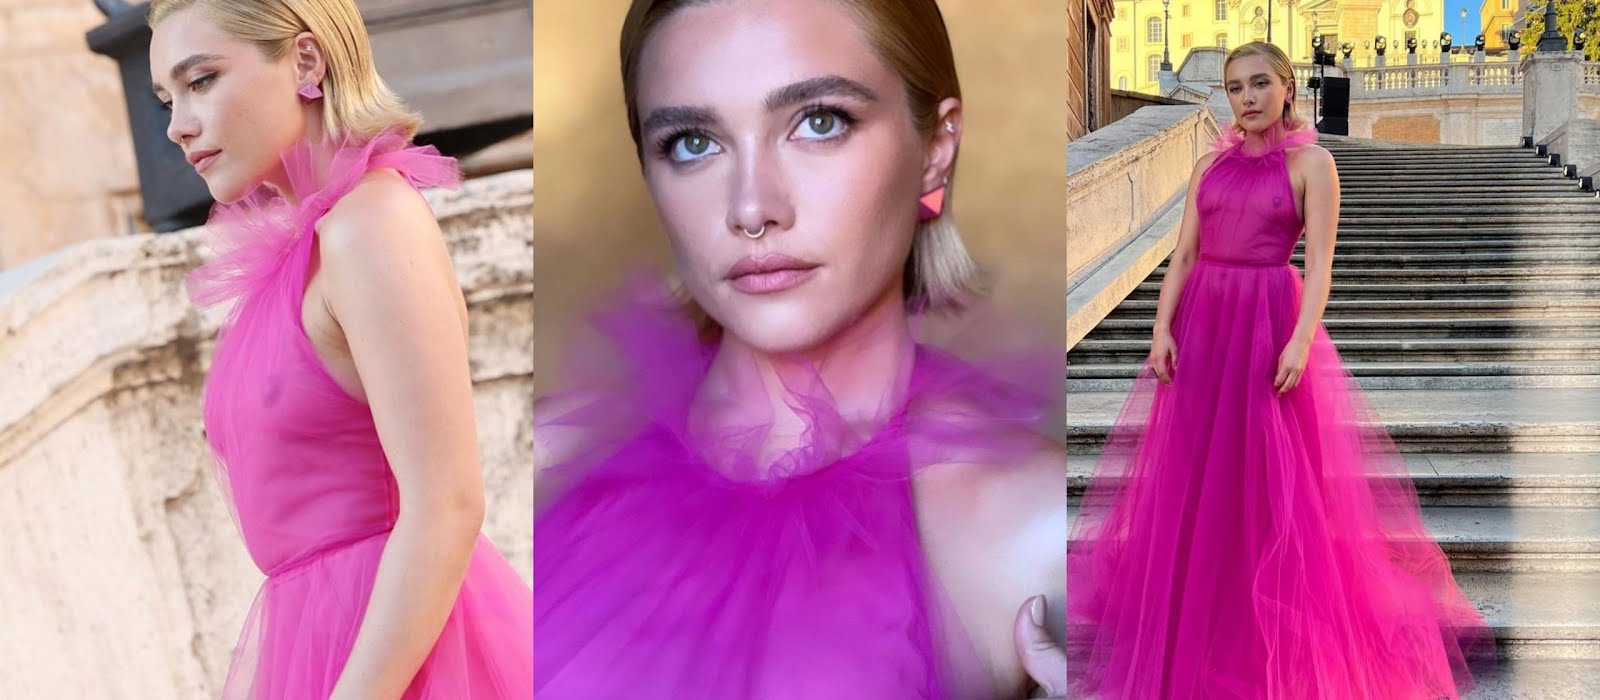 Florence Pugh: Is a visible female nipple the last clothing taboo?